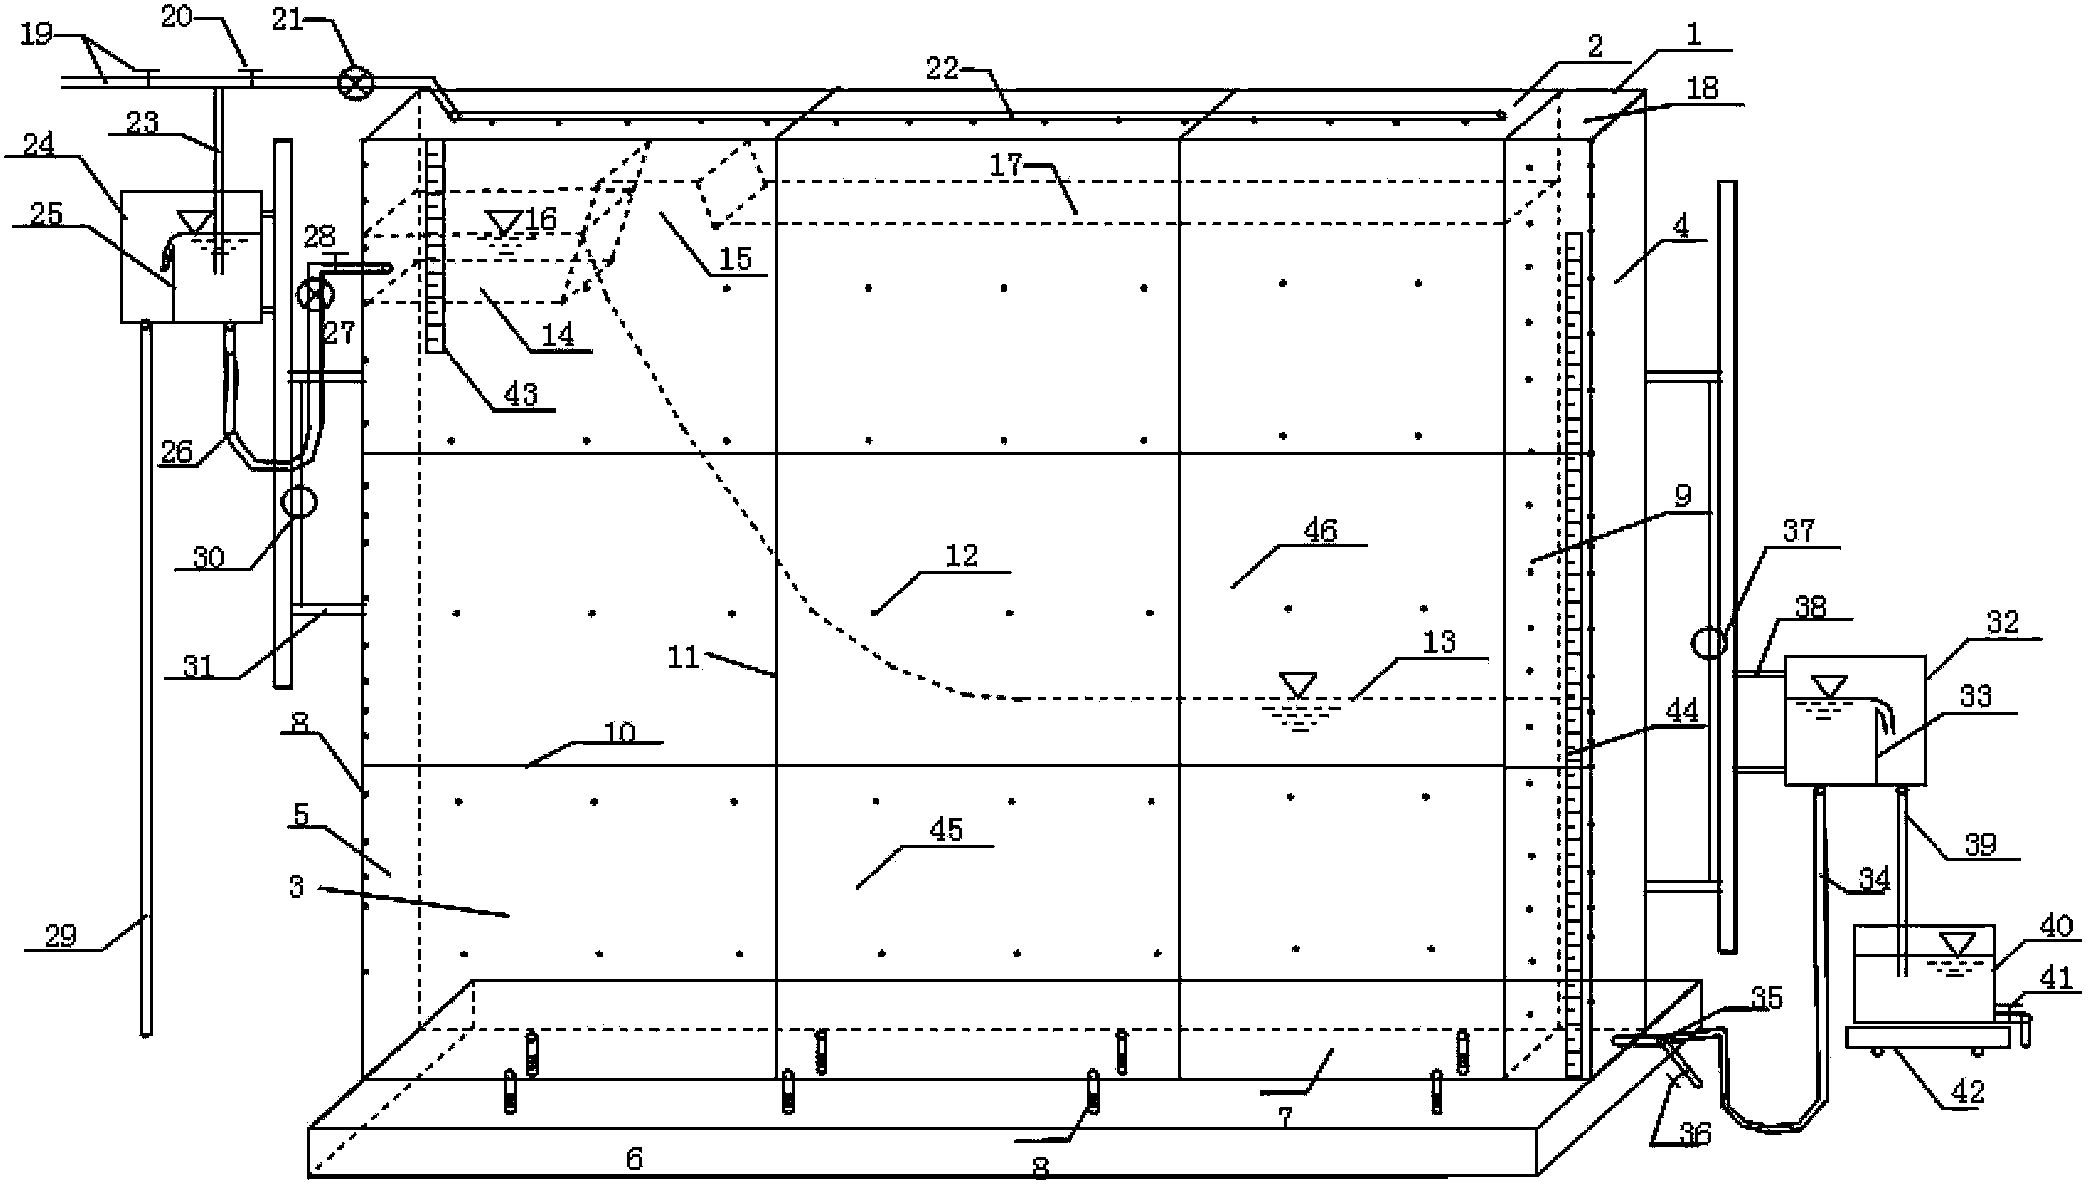 Riverway cross-section two-dimensional underground seepage hydraulic experiment device